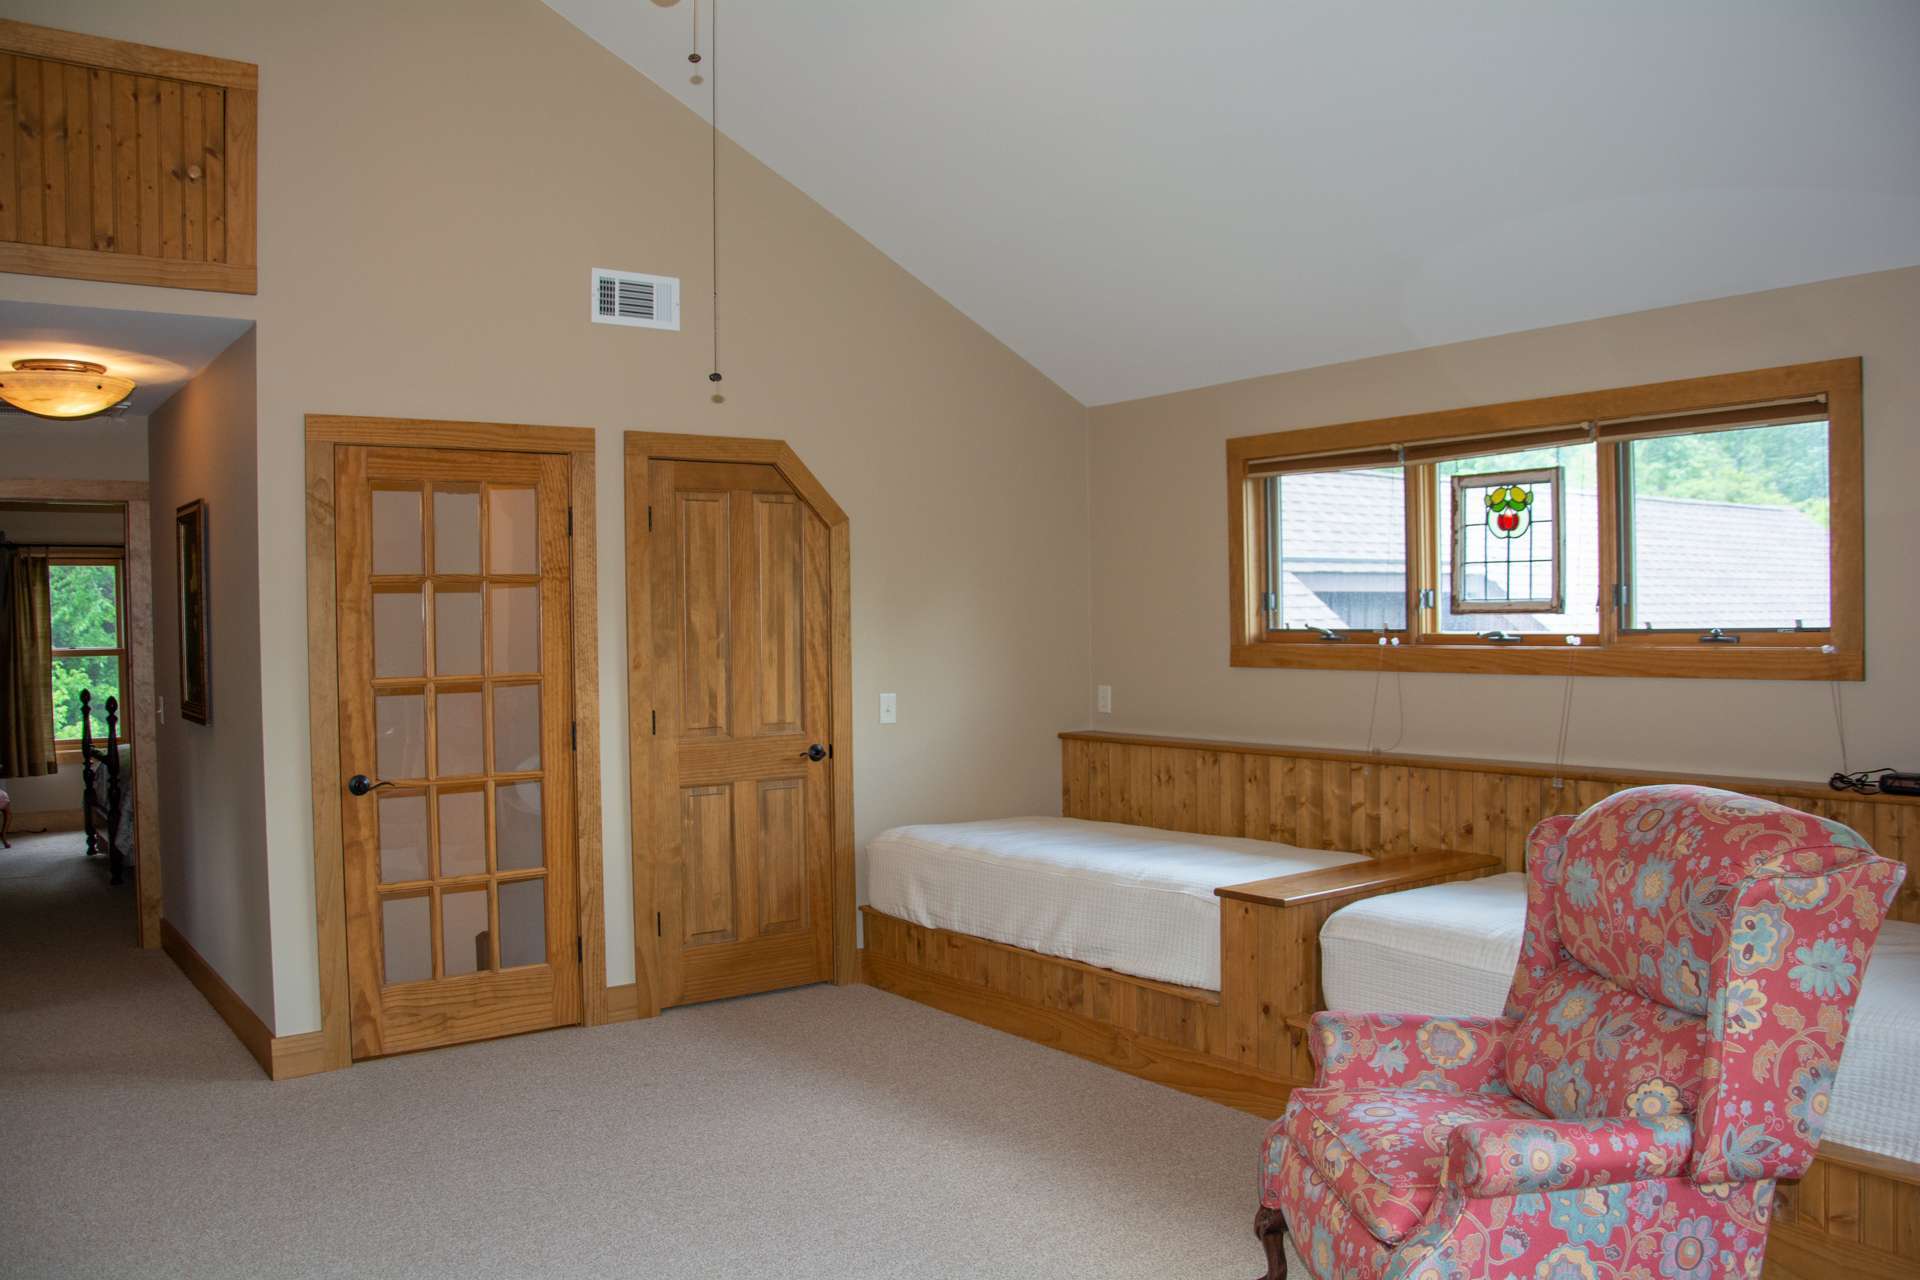 The upper level offers a large bonus room, ideal for additional sleeping space, play room or home gym.